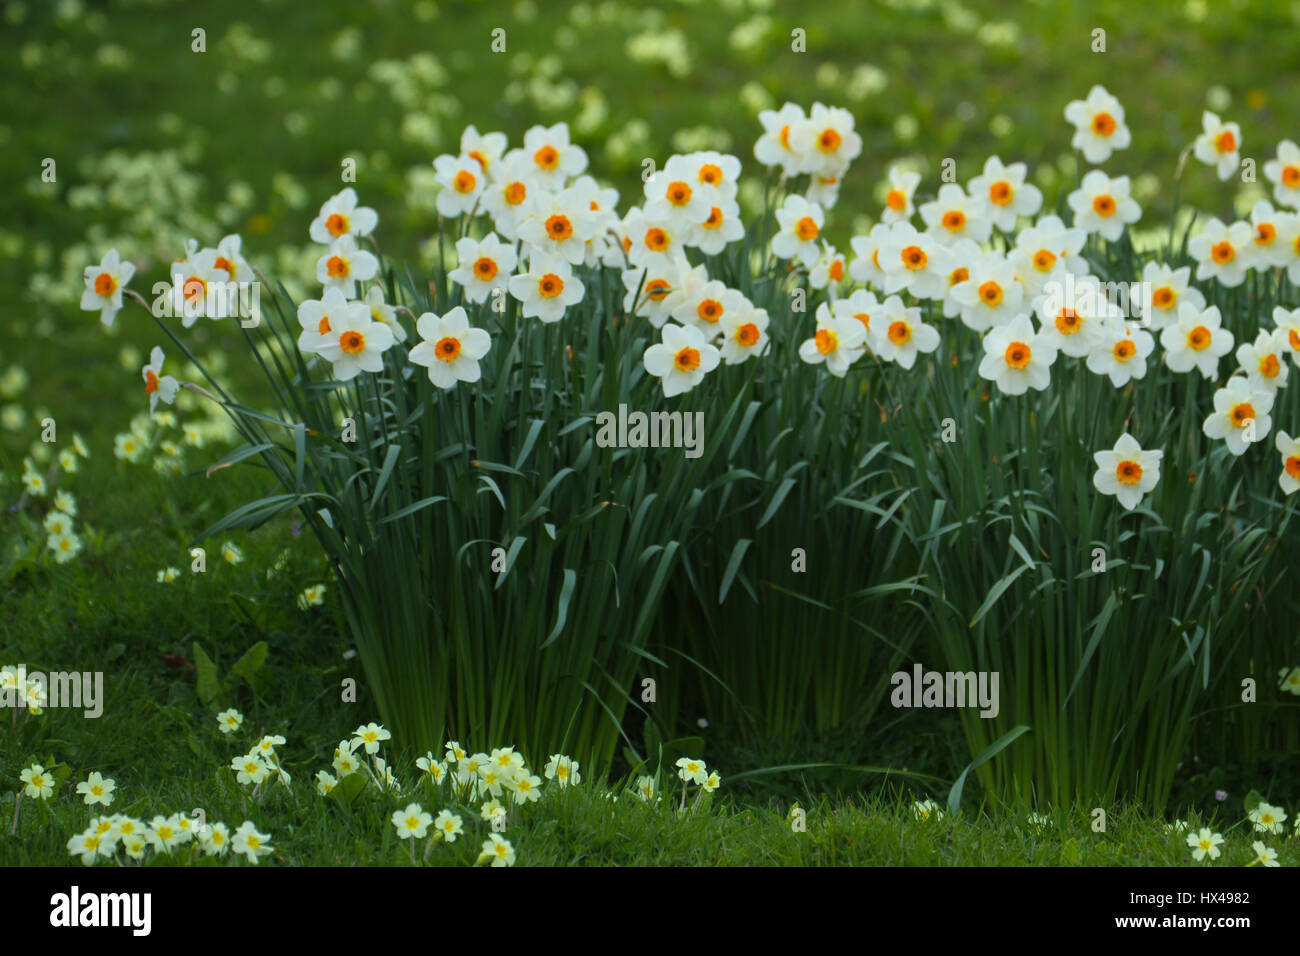 London, UK. March 24, 2017: Spring daffodil flowers in bloom at a walk way in  Port Lympne Zoo on March 24, 2017. Port Lympne Reserve near the town of Hythe in Kent, England is set in 600 acres and incorporates the historic mansion and landscaped gardens. © David Mbiyu/Alamy Live News Stock Photo